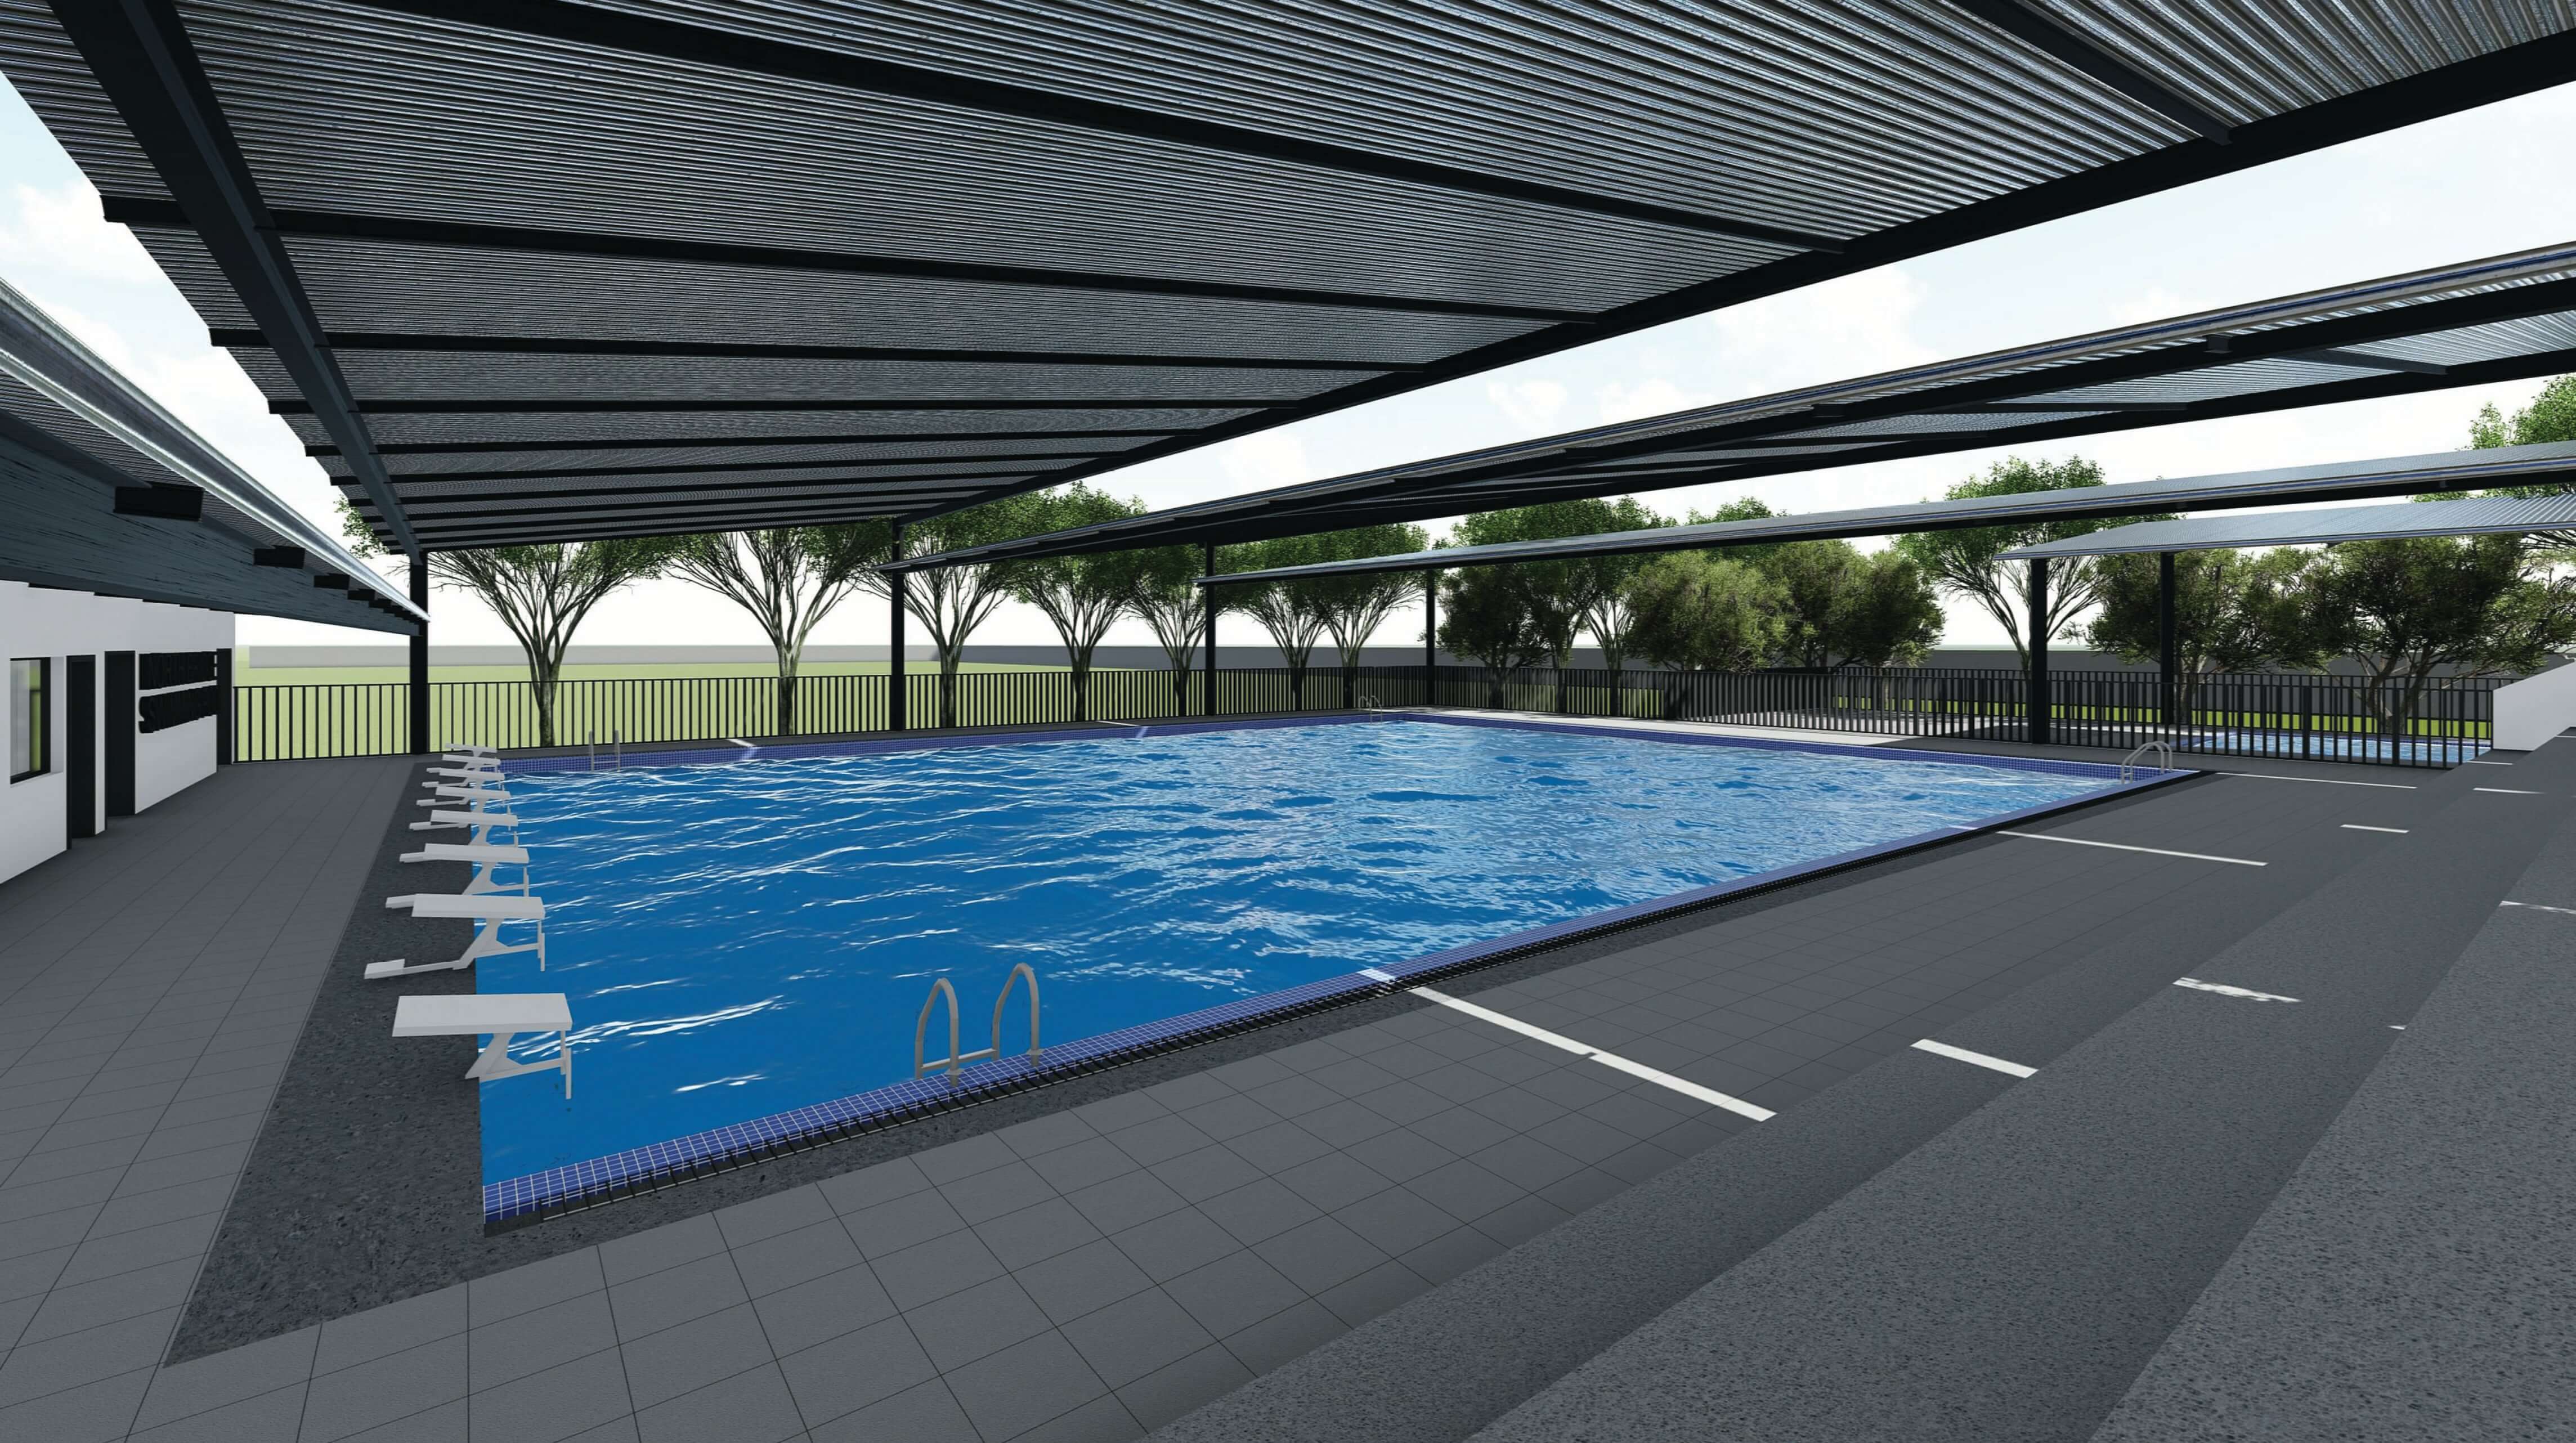 New Northbridge Aquatics Centre to provide students with world-class learning and training facility - new-northbridge-aquatics-centre-to-provide-students-with-world-class-learning-and-training-facility